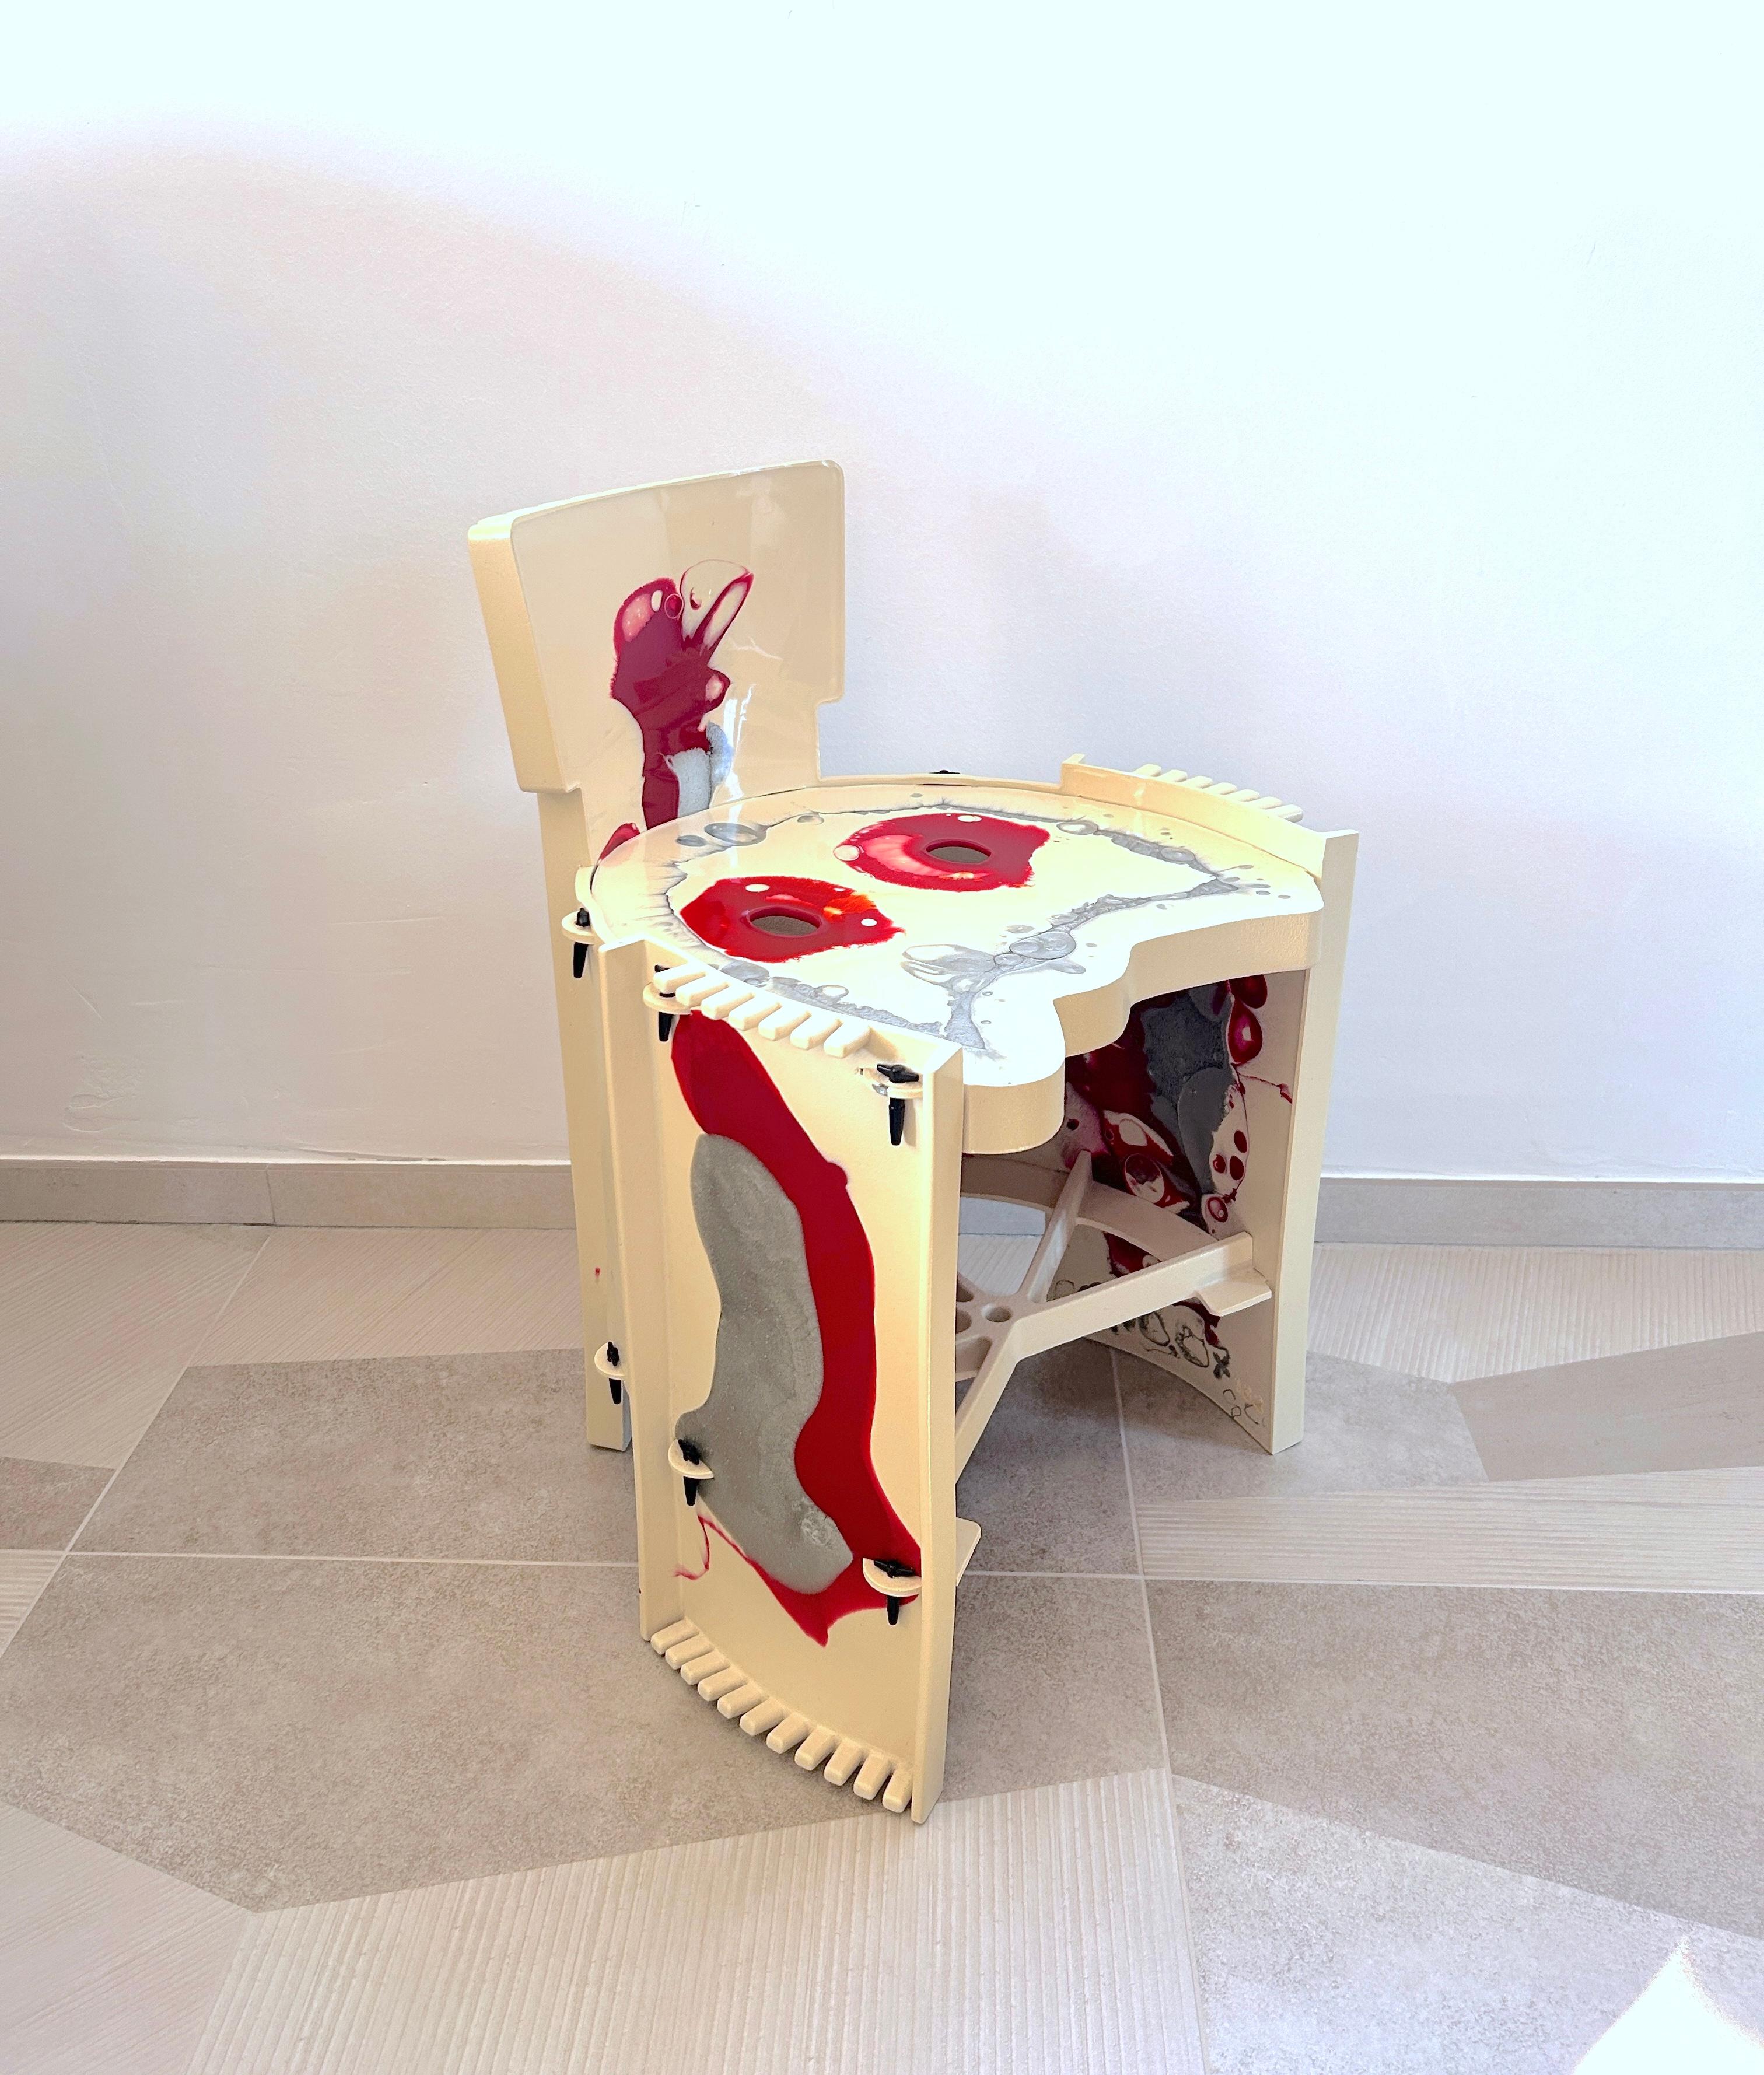 Beautiful small chair made by Gaetano Pesce for Zerodiegno in 2003.
Decorated in shades of white, red and silver, it lends a touch of elegance to the room in which it is placed. Usable by children as an armchair, it can be used by adults as a small